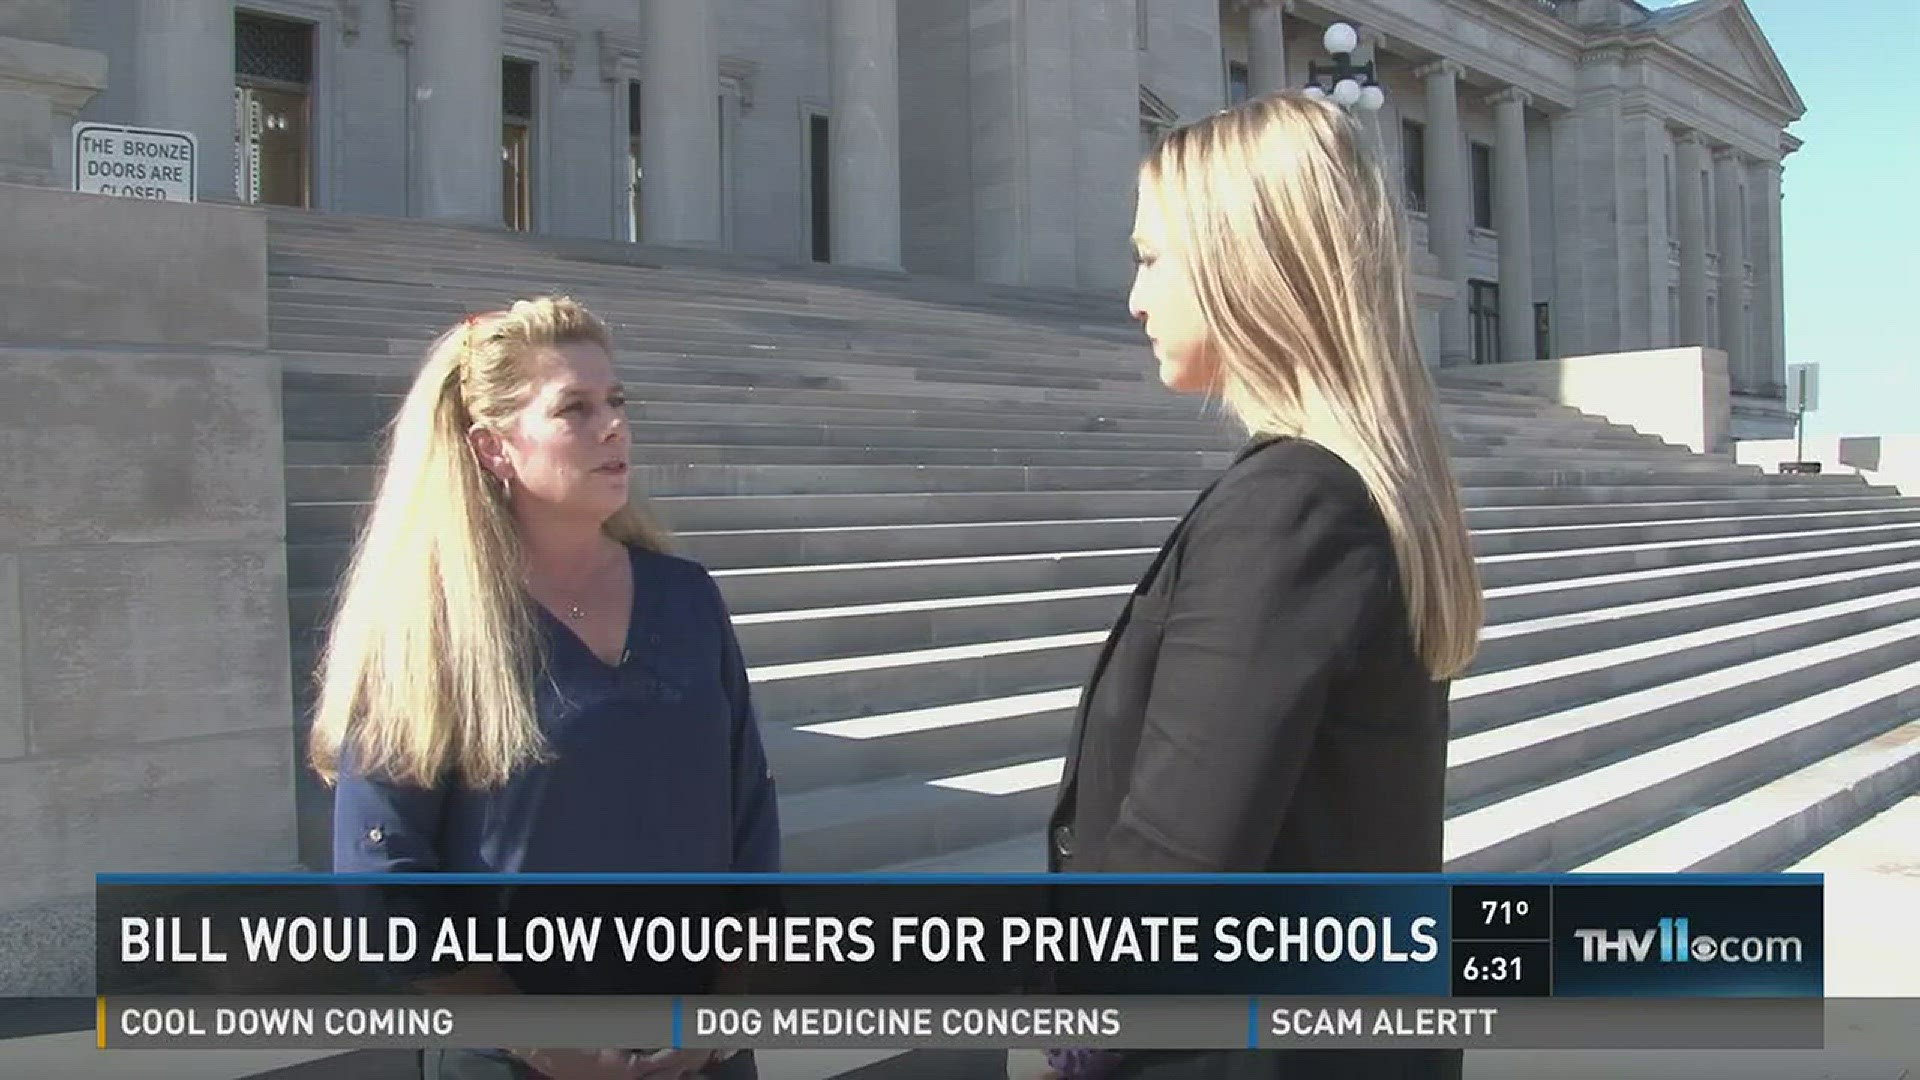 Bill would allow vouchers for private schools